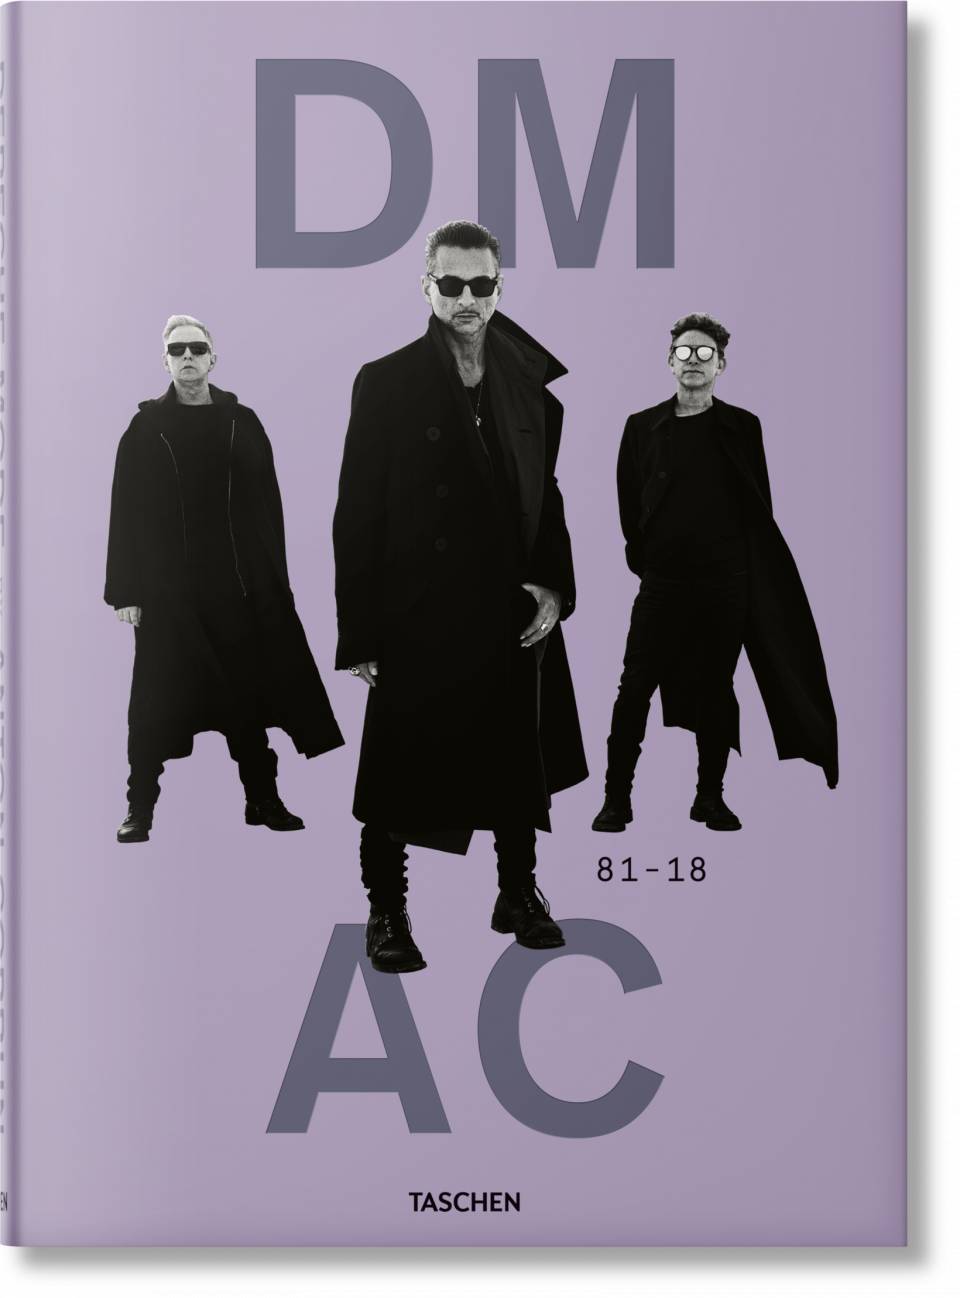 Depeche Mode by Anton Corbijn (EXTRA LARGE) (English, French and German Edition) - 9783836586702